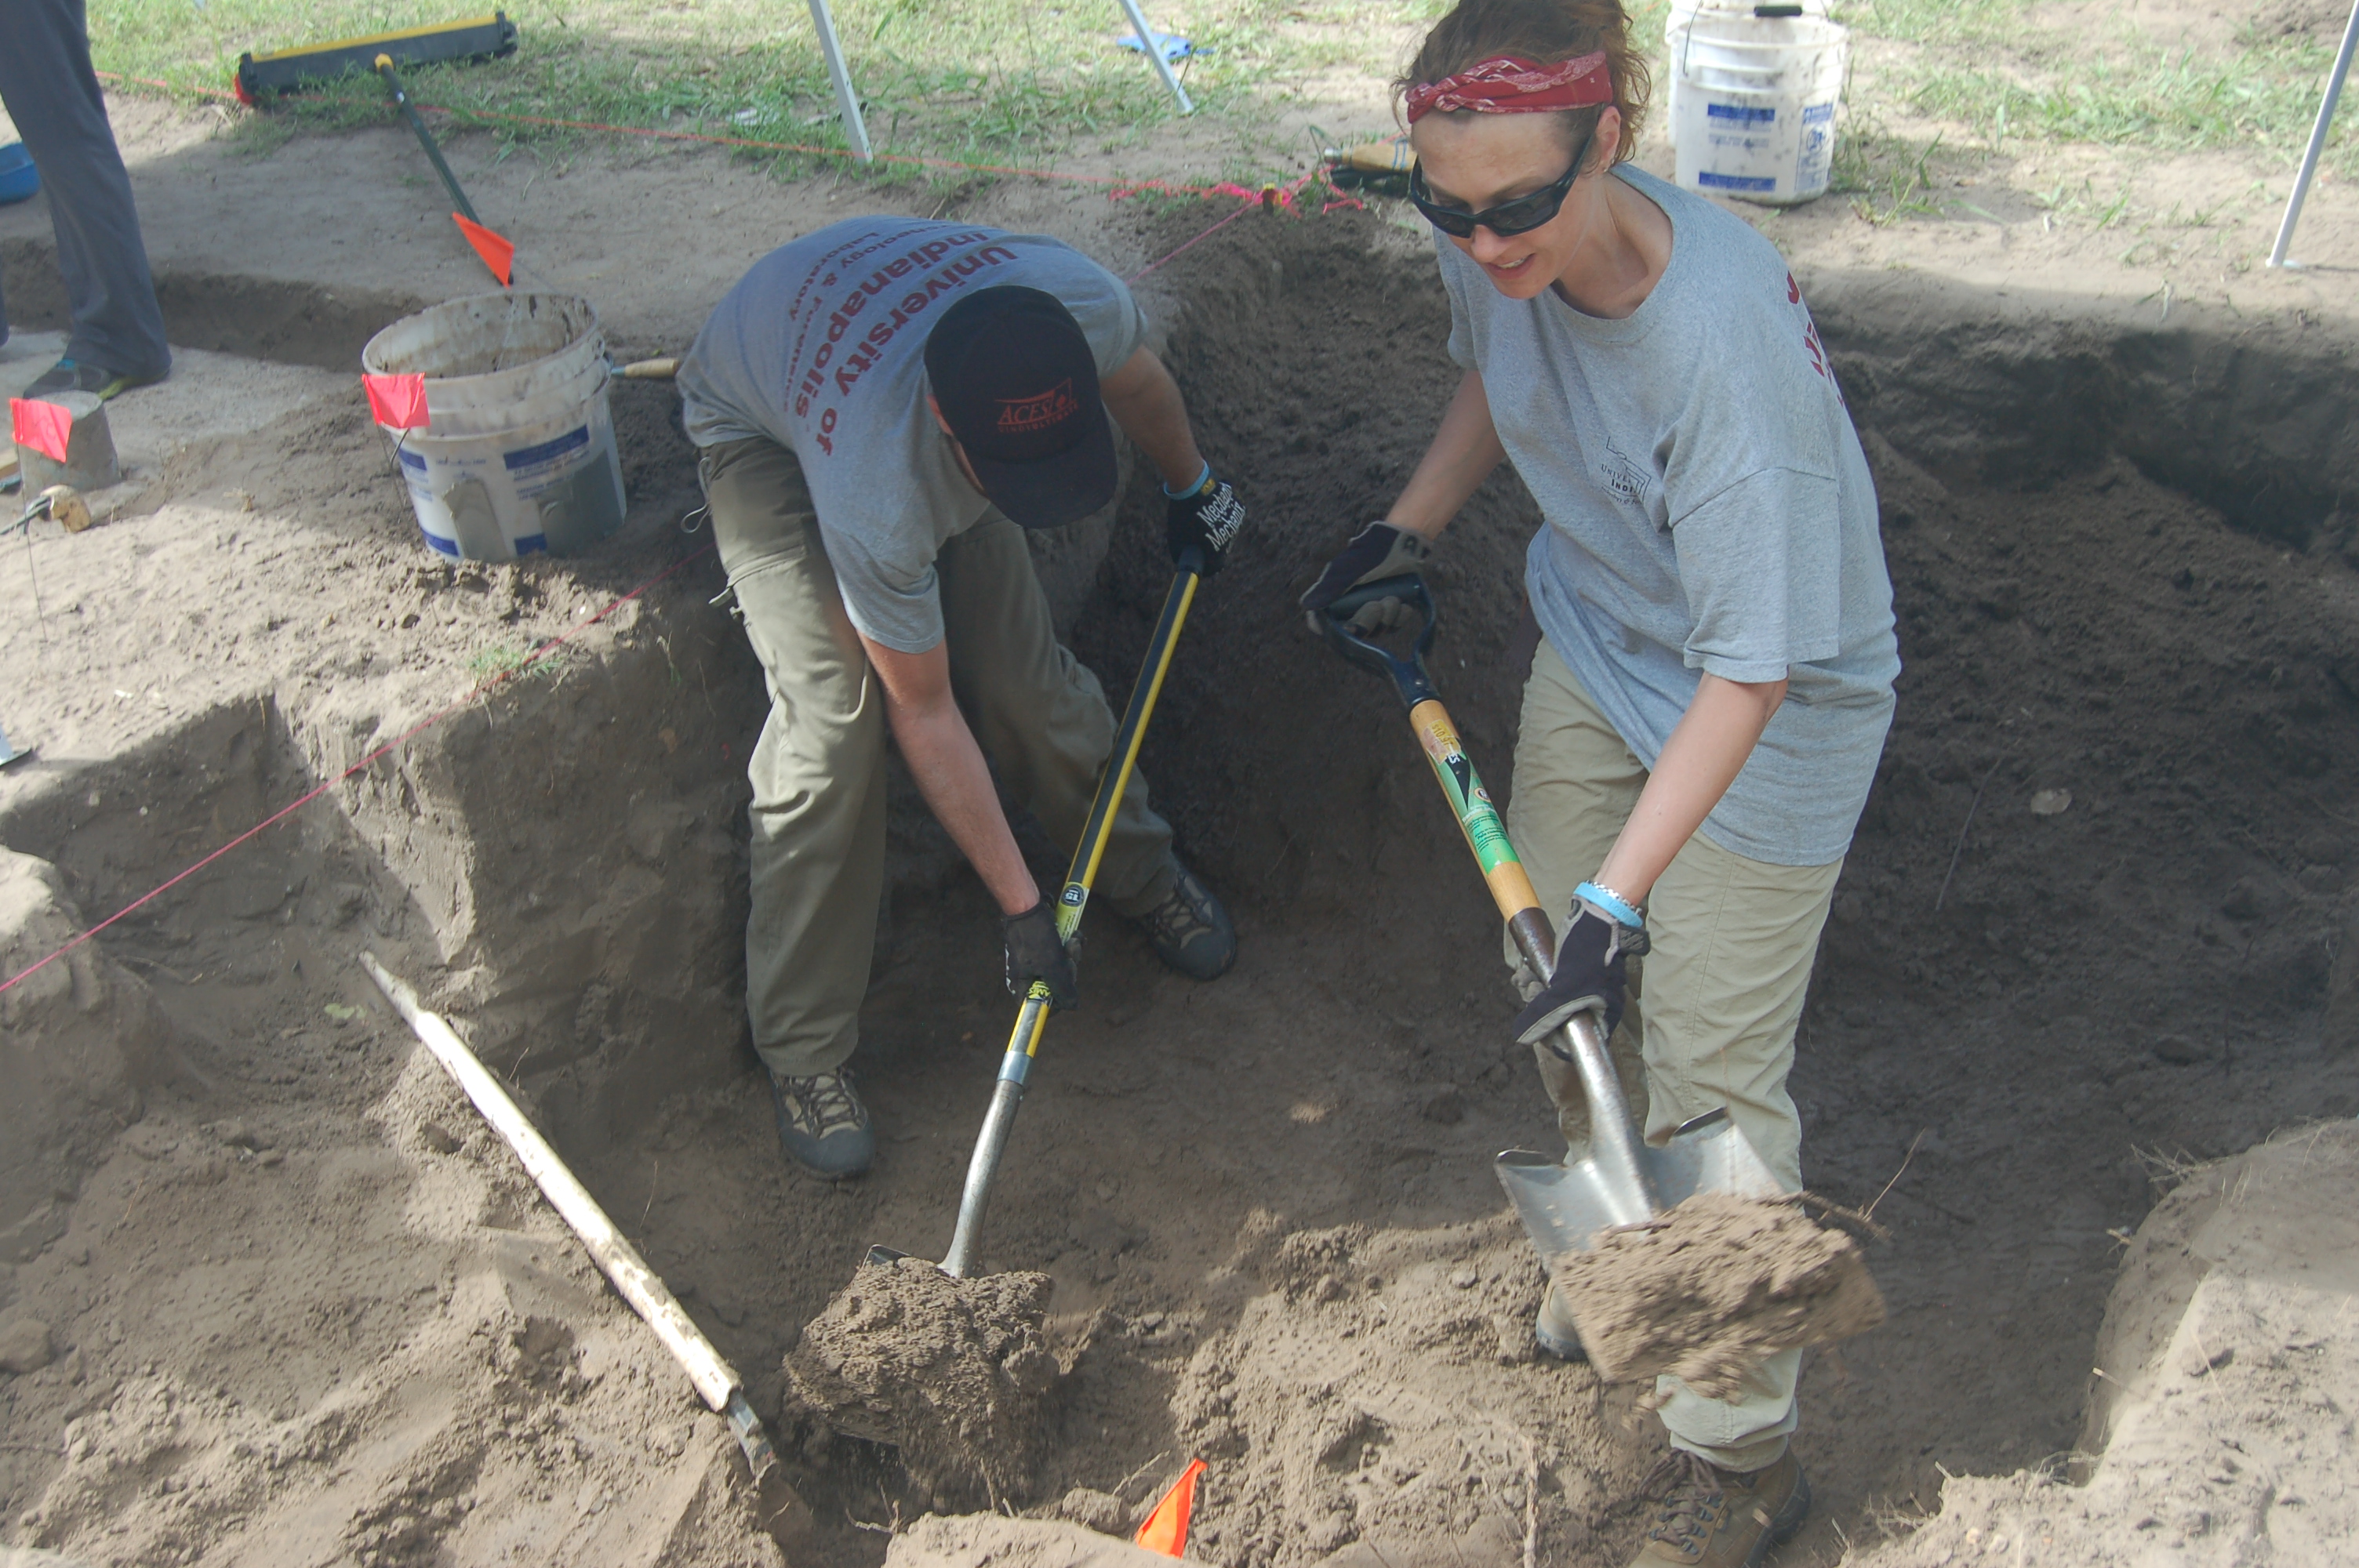 Team members digging with shovels within a burial